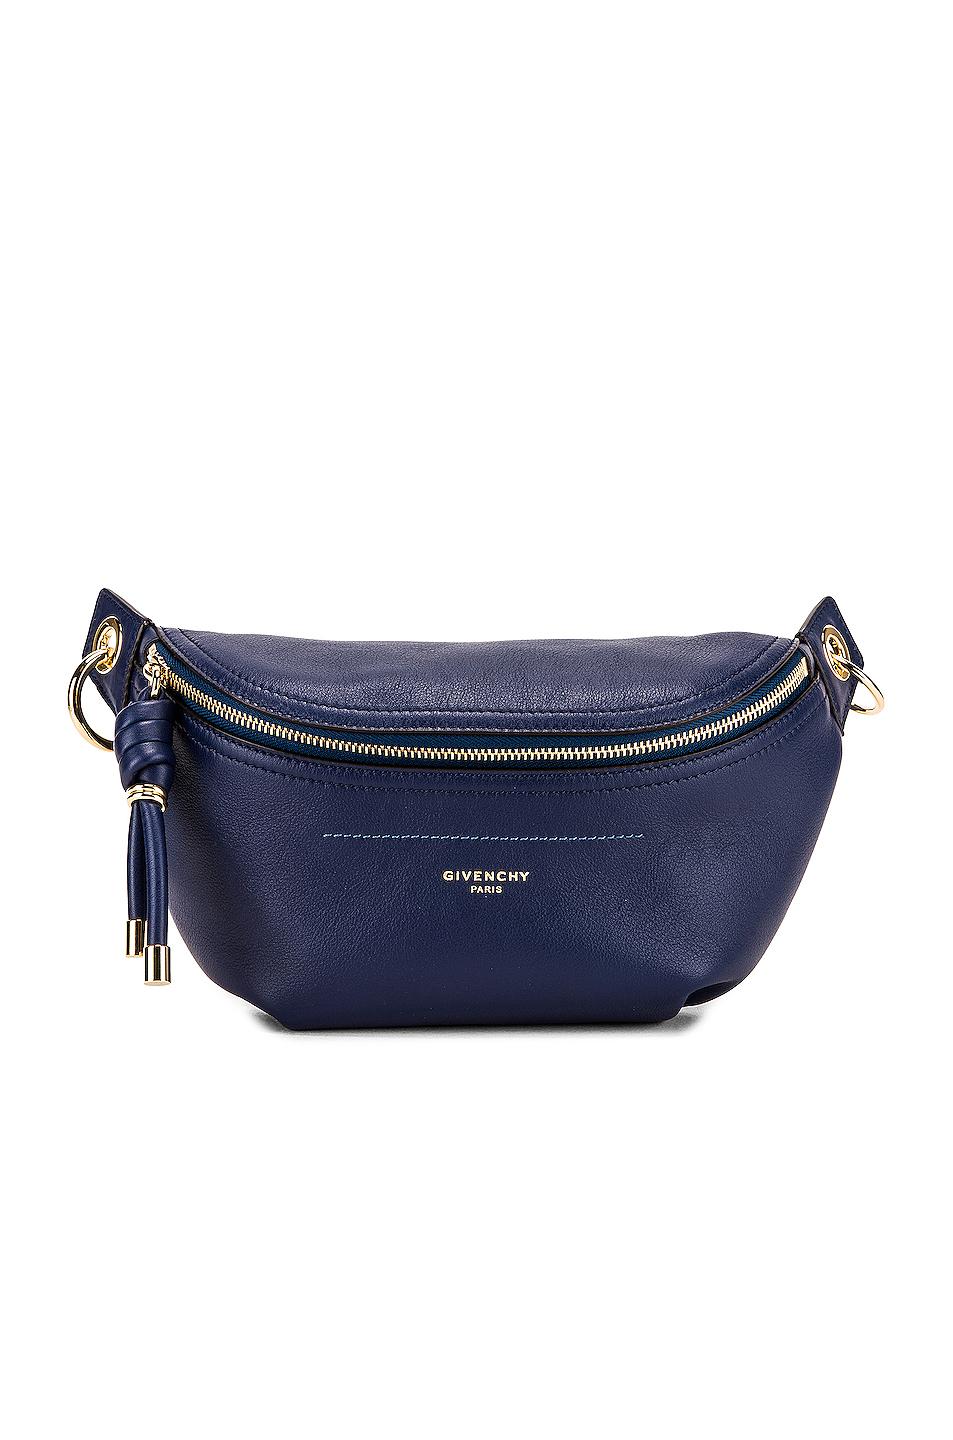 Givenchy Contrast Chain Whip Belt Bag in Blue - Lyst